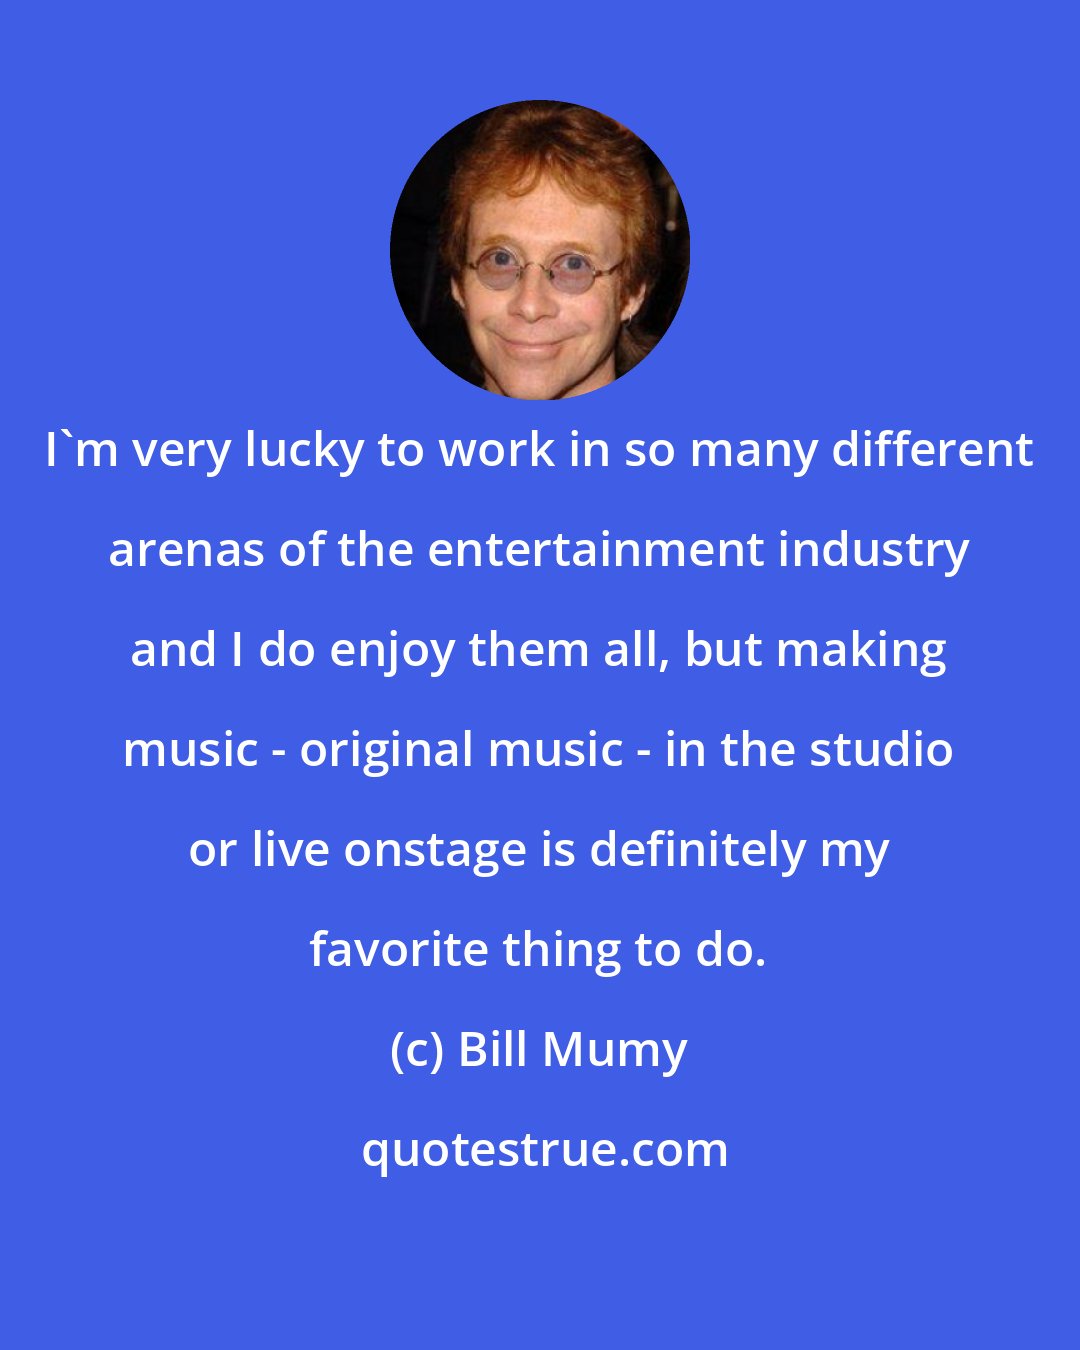 Bill Mumy: I'm very lucky to work in so many different arenas of the entertainment industry and I do enjoy them all, but making music - original music - in the studio or live onstage is definitely my favorite thing to do.